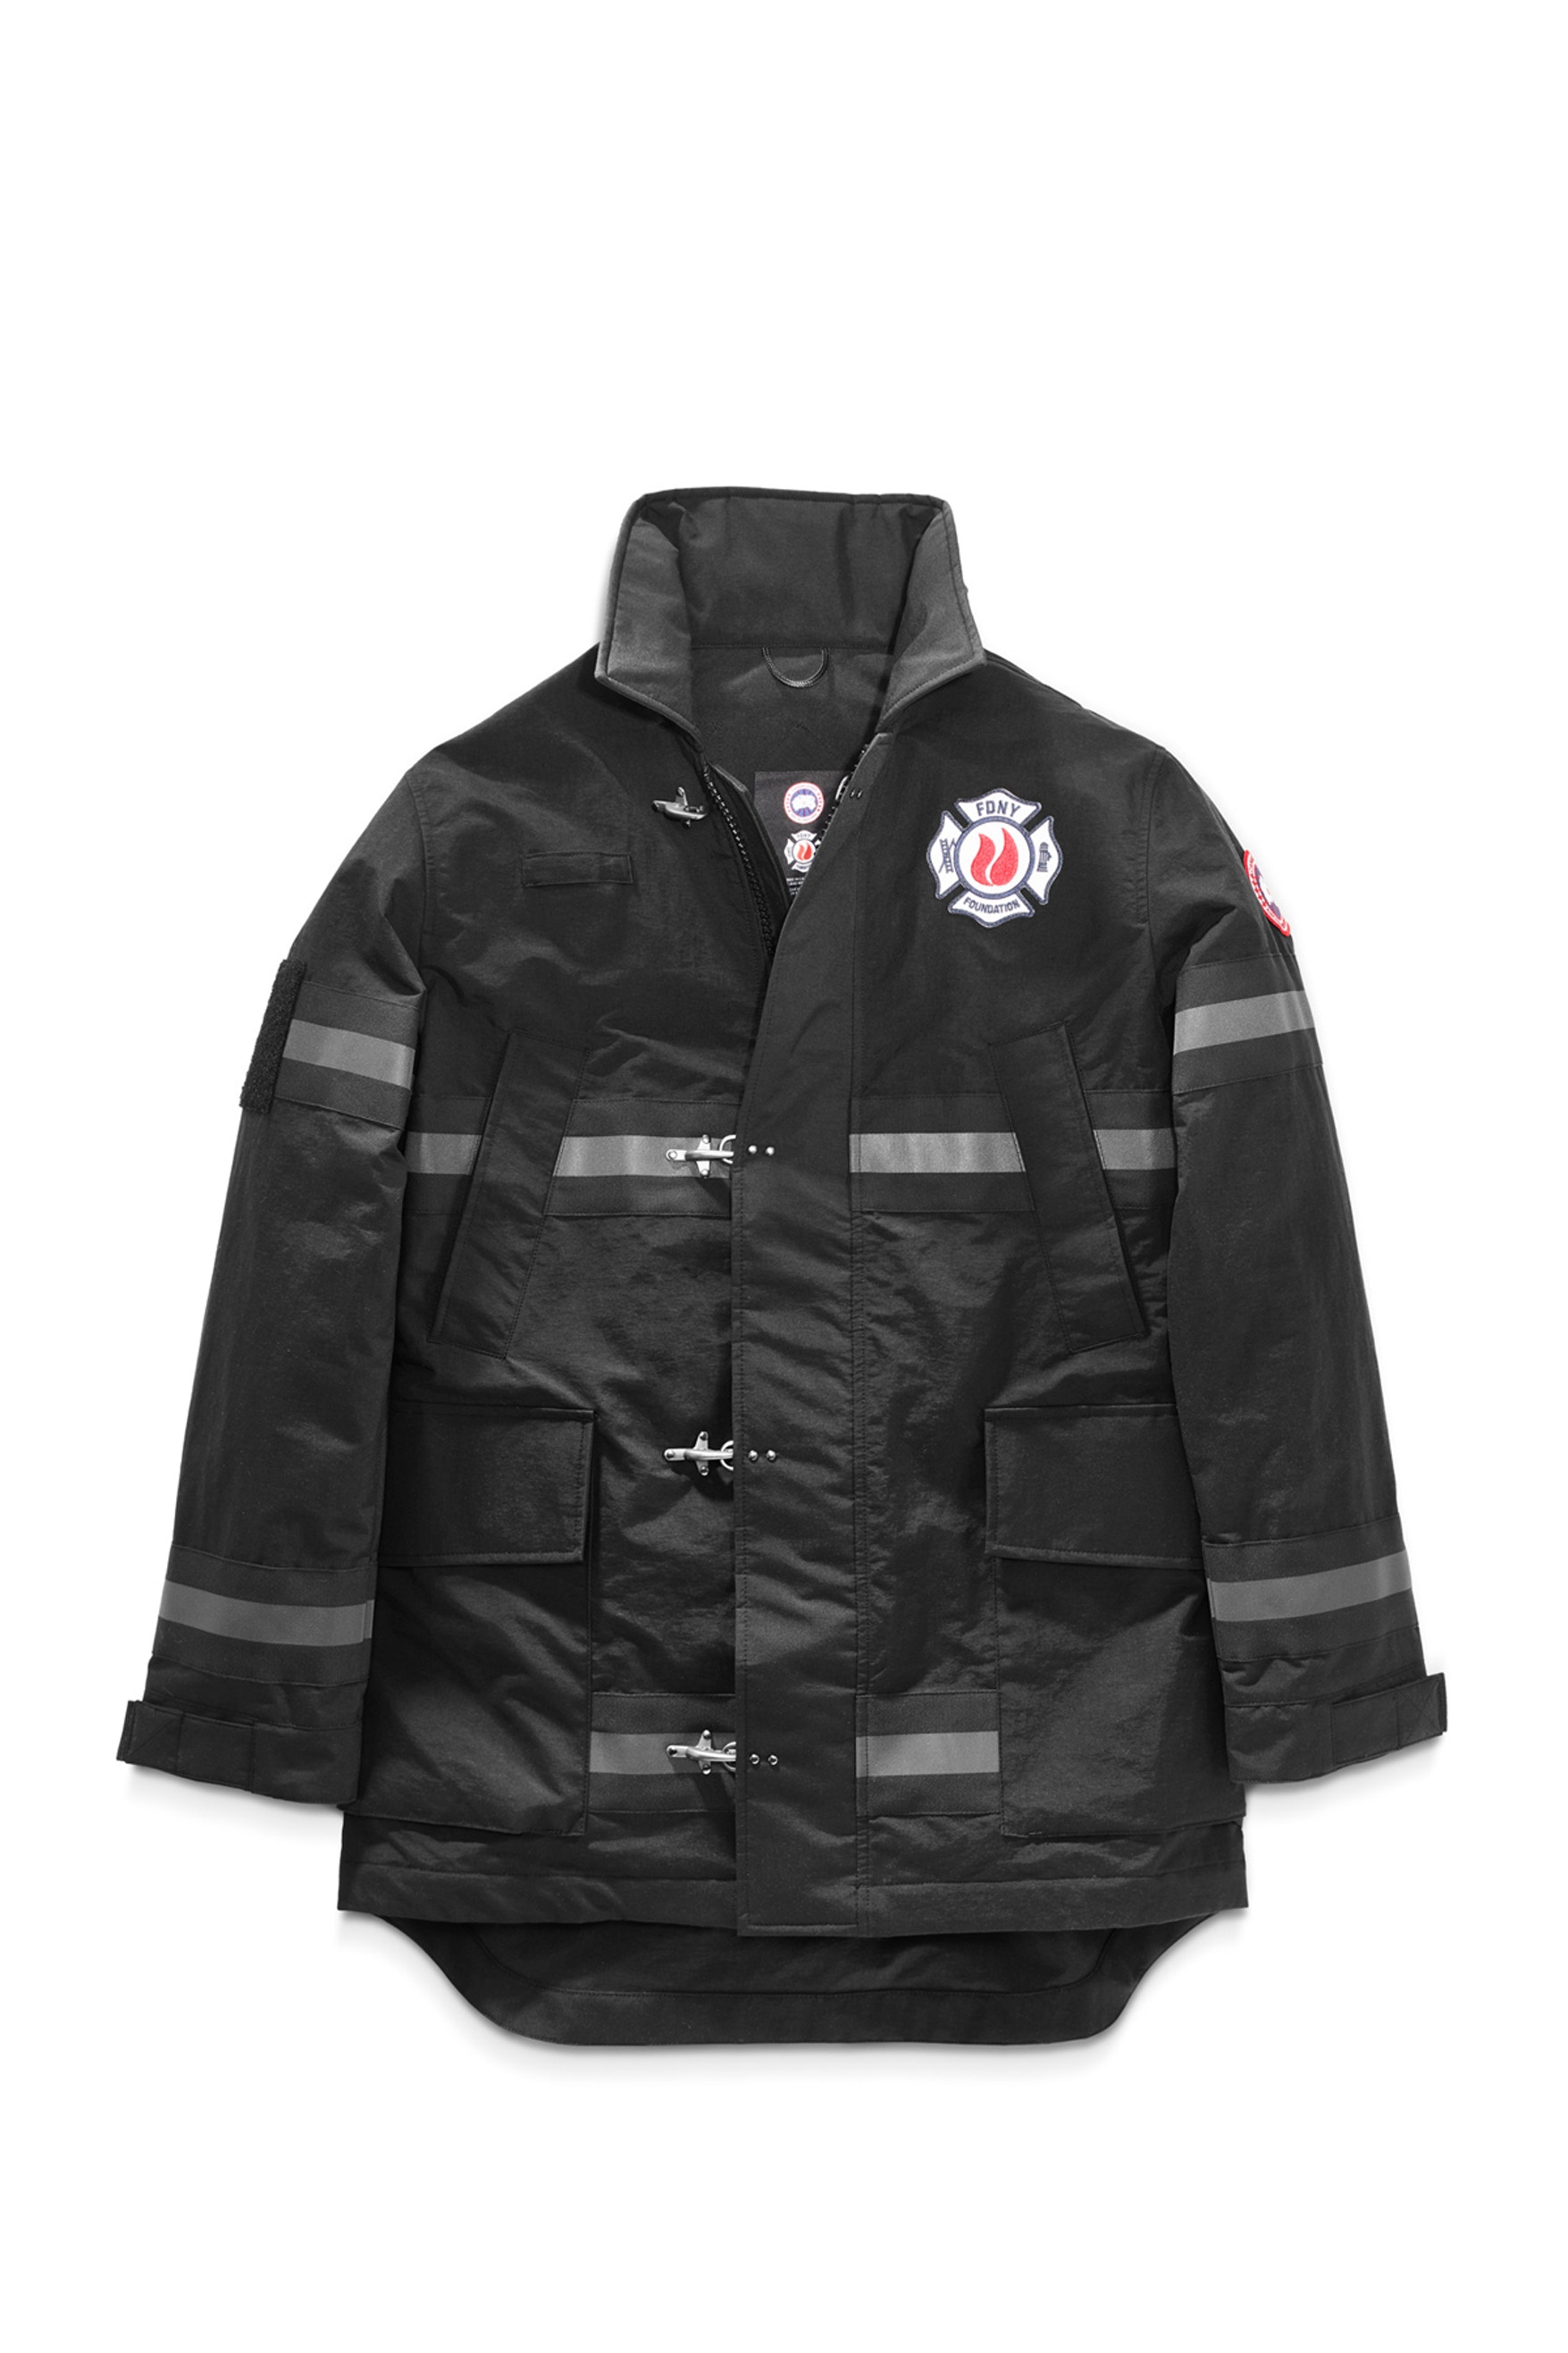 Canada Goose Joins FDNY in Collab